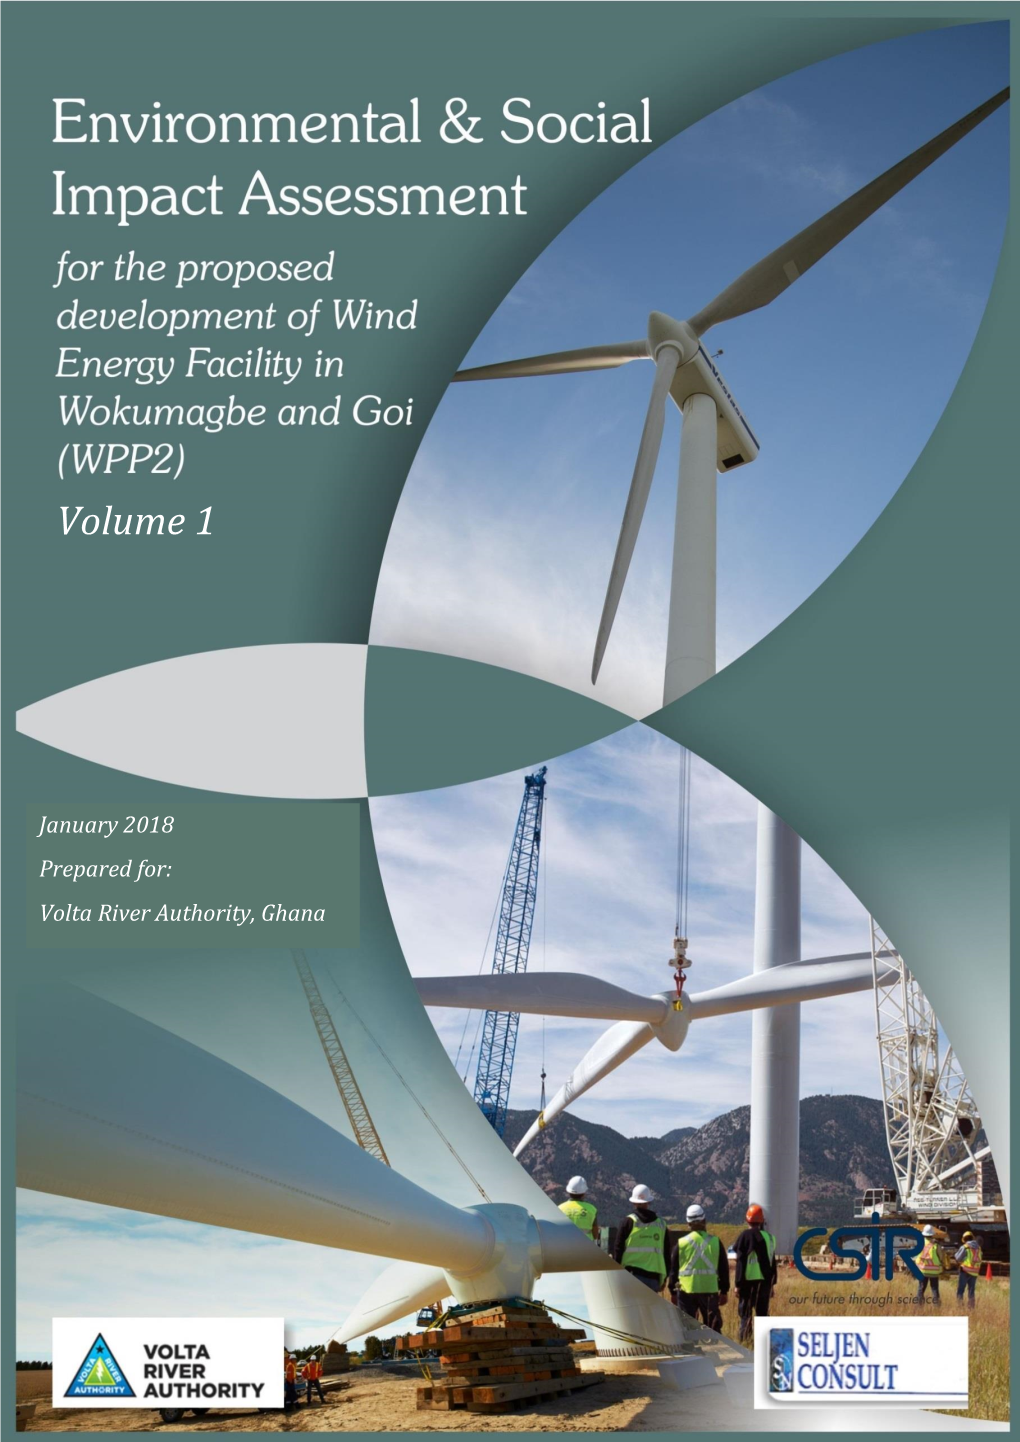 Wind Power Project 2 Draft ESIA Report (Volume 1)